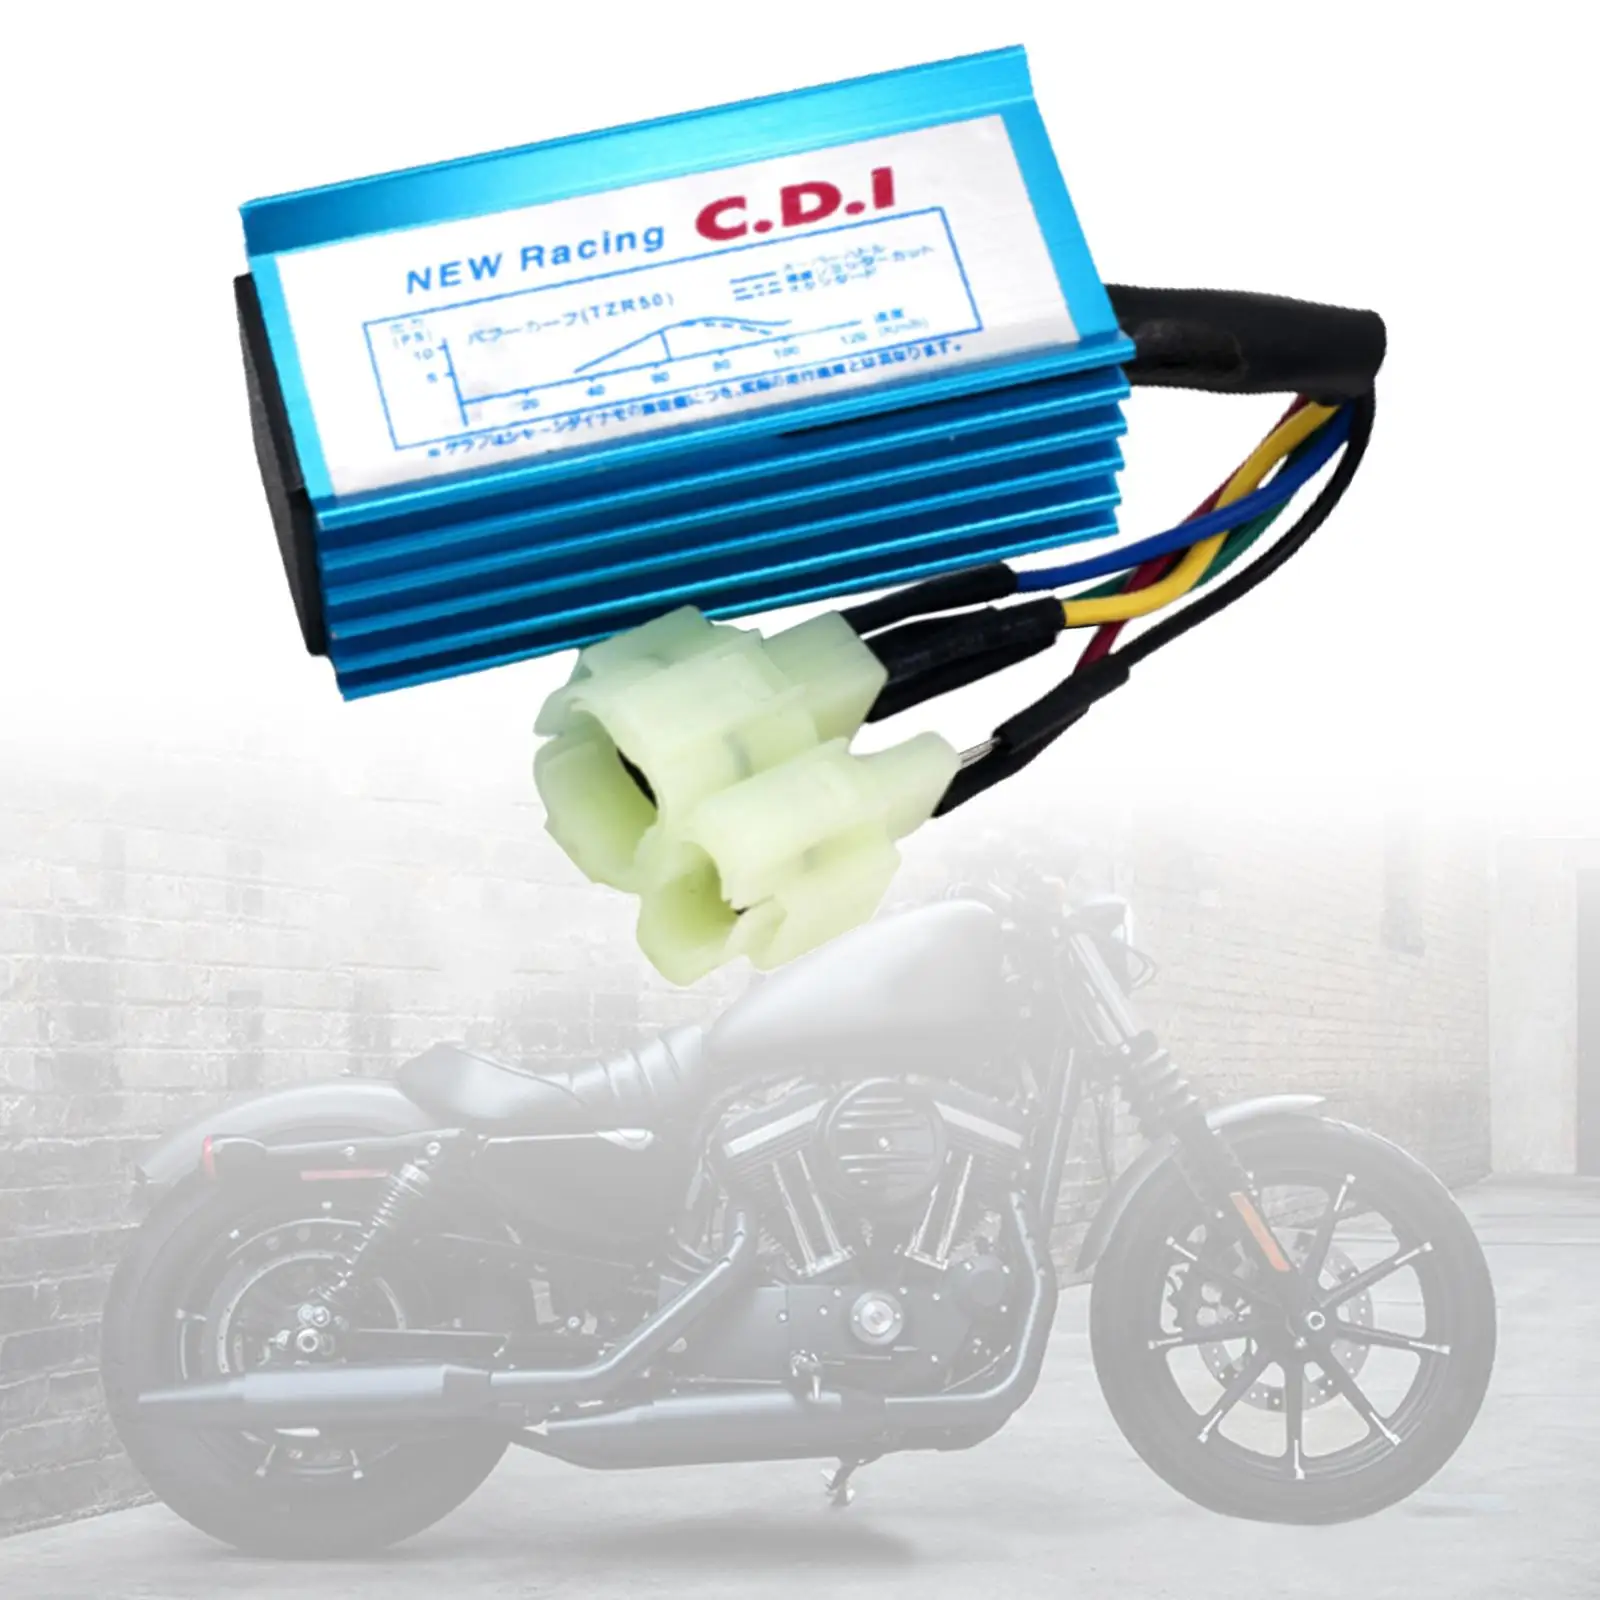 66  Cdi Box with Ignition Coil Aluminum  for Gy6 50cc-250cc Series Engines Scooters Locomotives Go-Karts Motorbikes